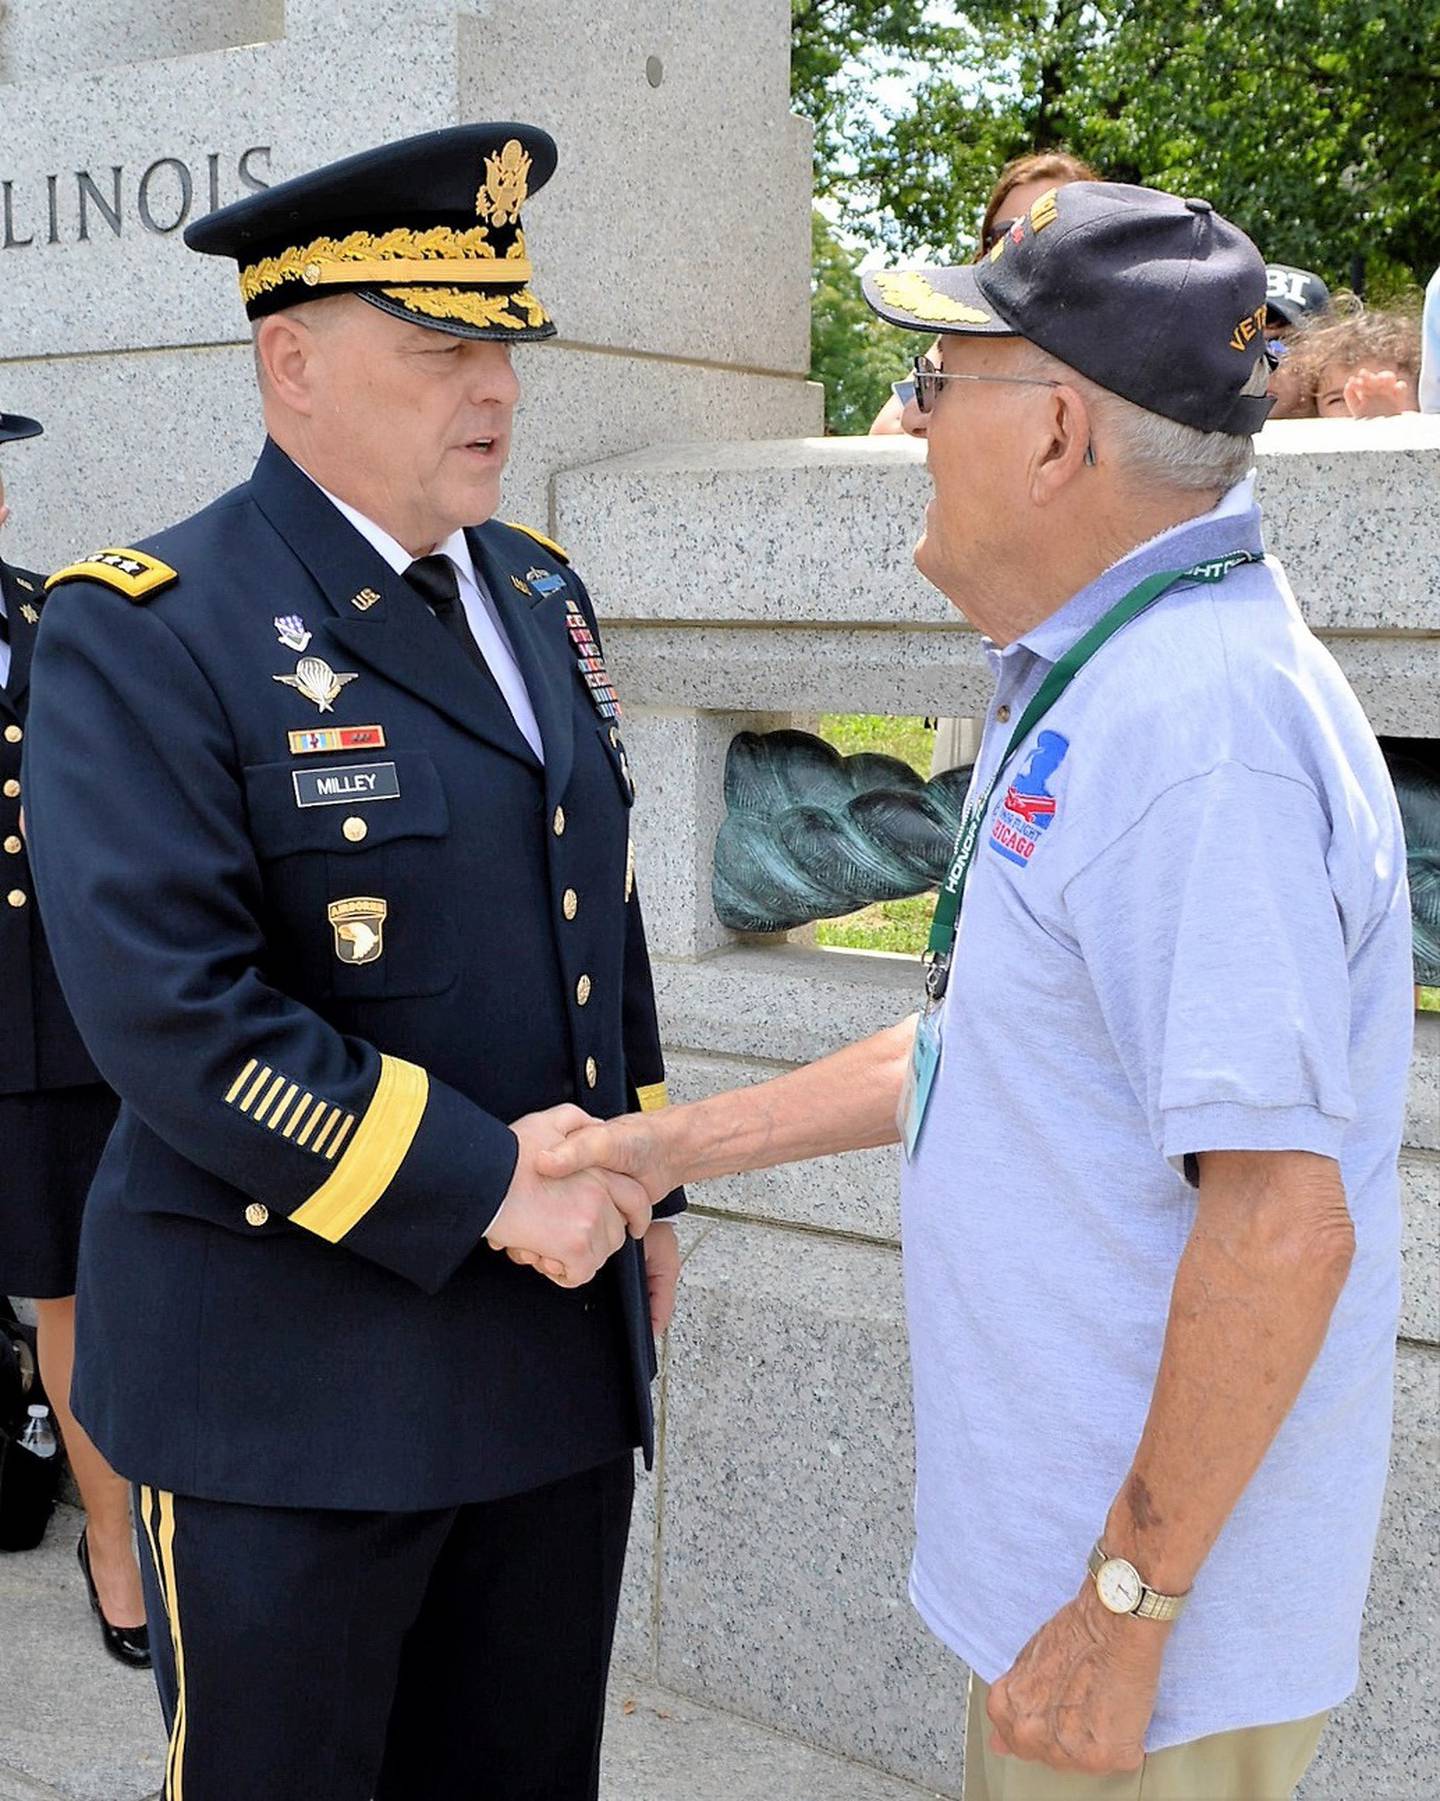 During the Honor Flight, Glenn Maek of Joliet met U.S. Army Chief of Staff Gen. Mark Milley, who became chairman of the Joint Chiefs of Staff in 2019.